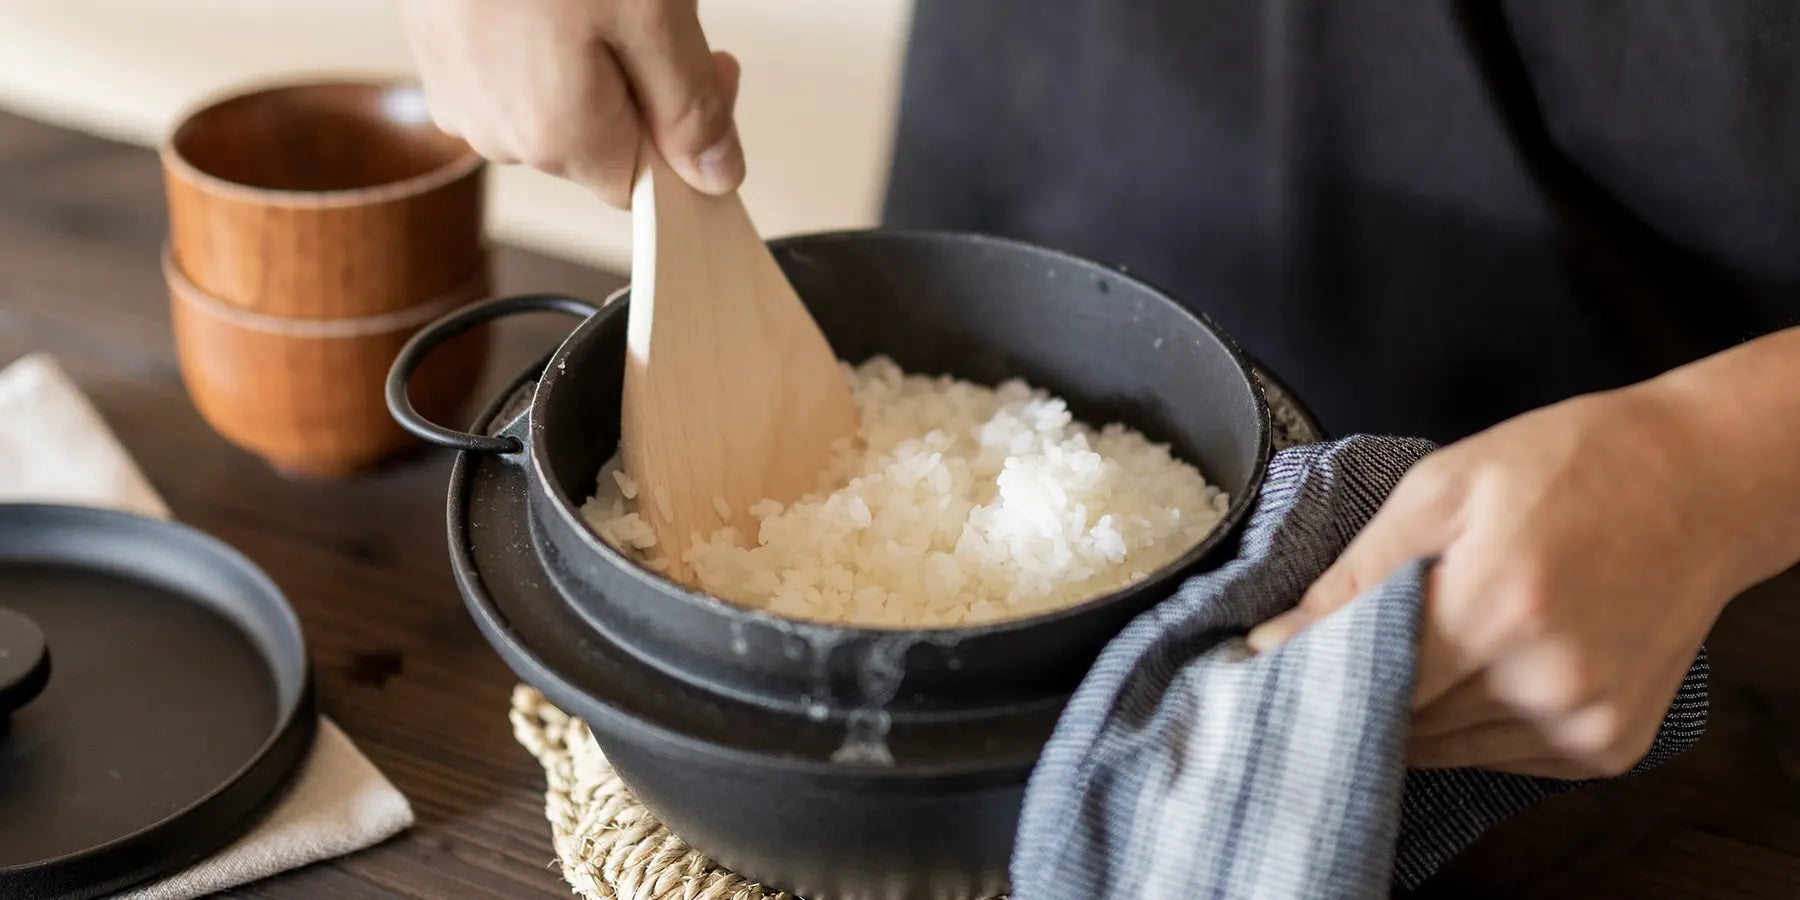 Discover our great selection of Rice Cookers at Globalkitchen Japan.